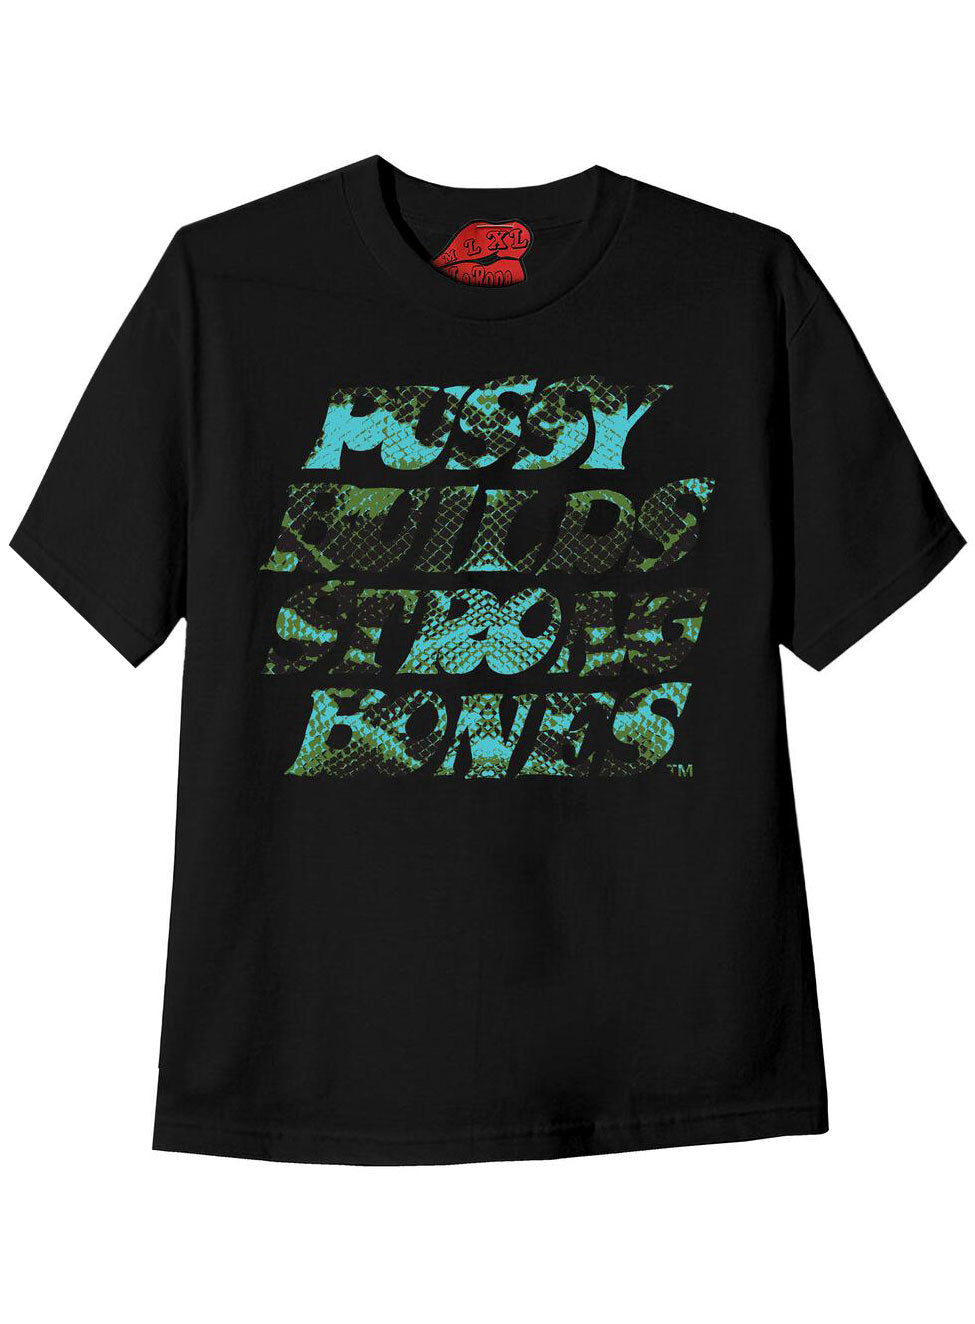 To Live and Fly in LA Ropa Streetwear Shirt Lips Los Angeles Black PBSB